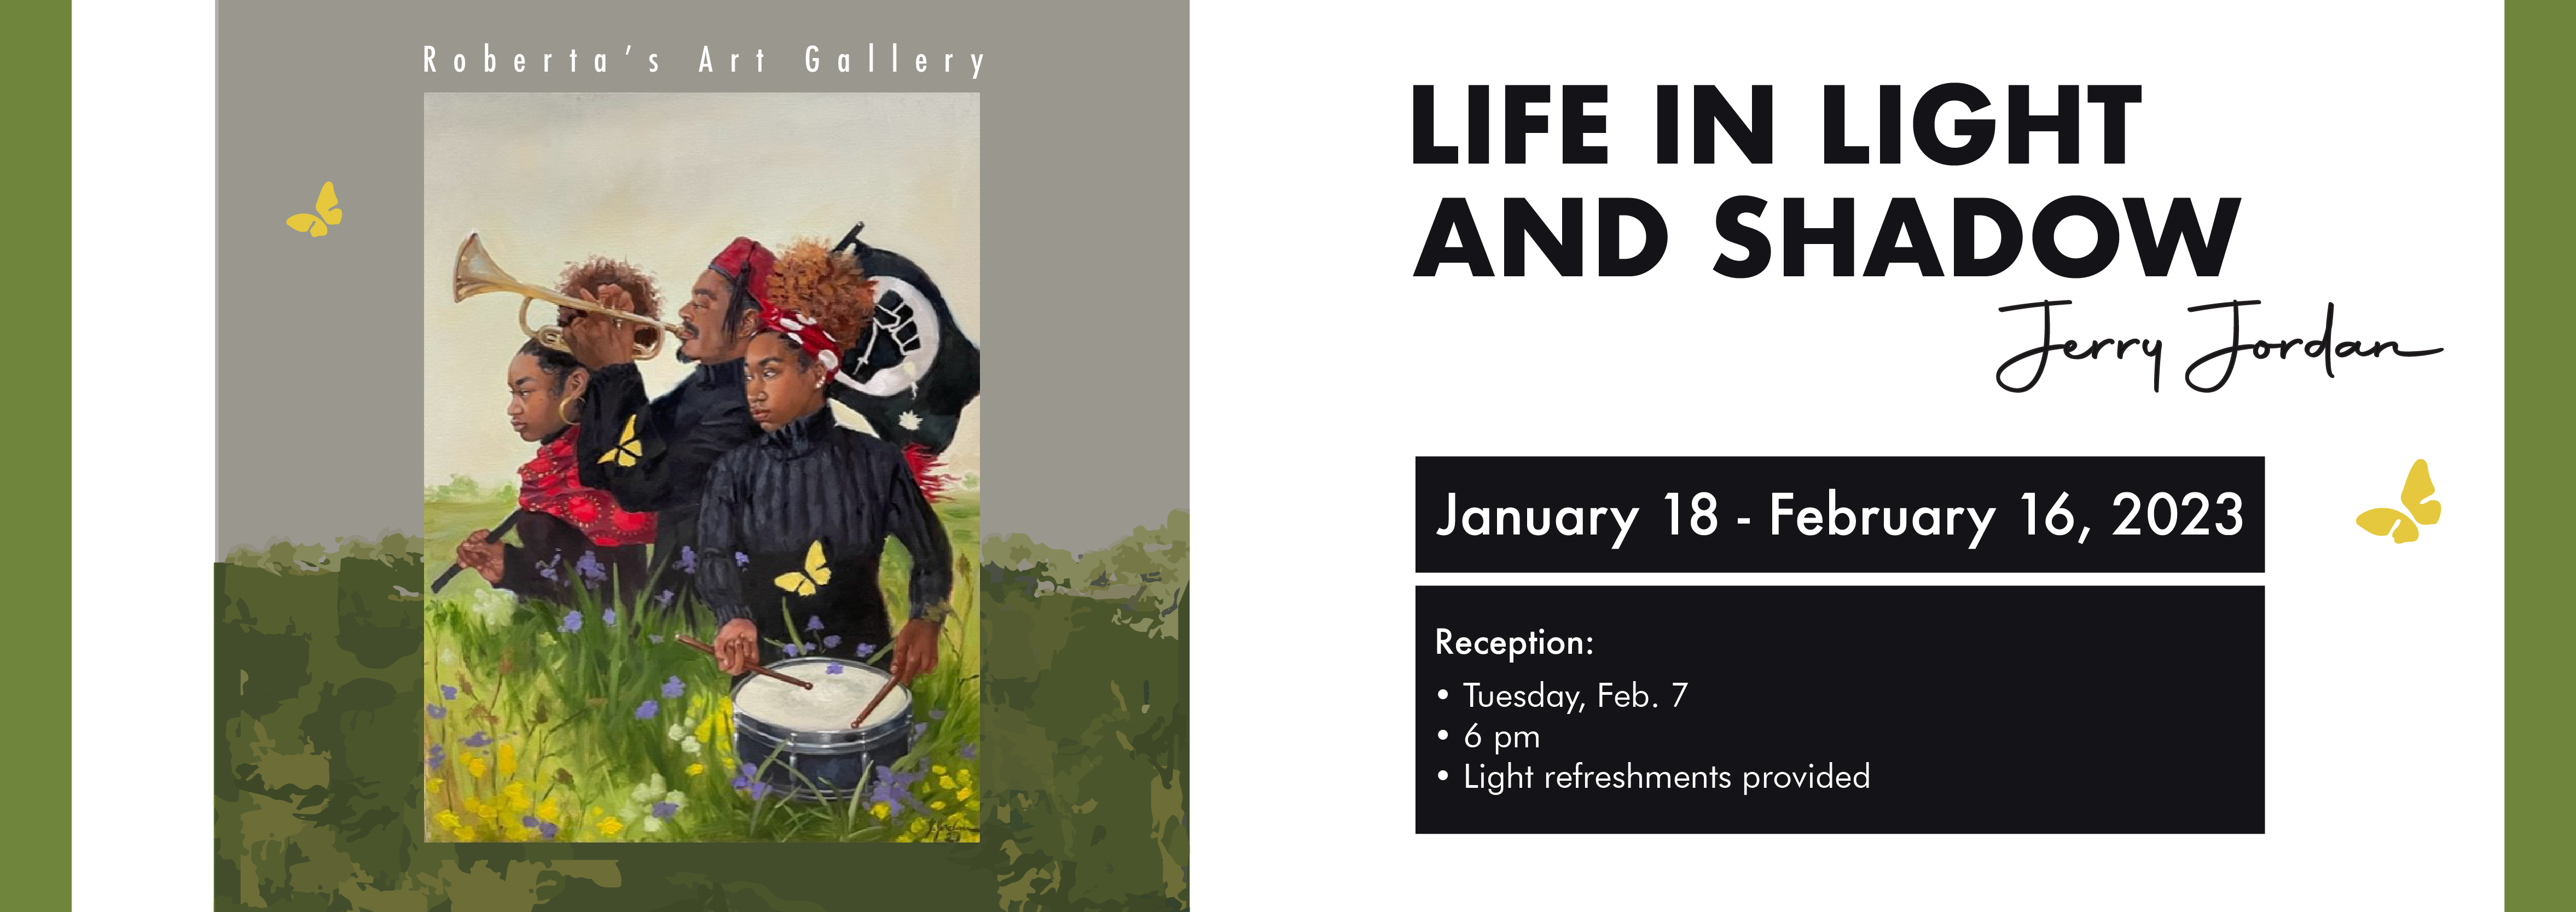 life in light and shadow exhibit